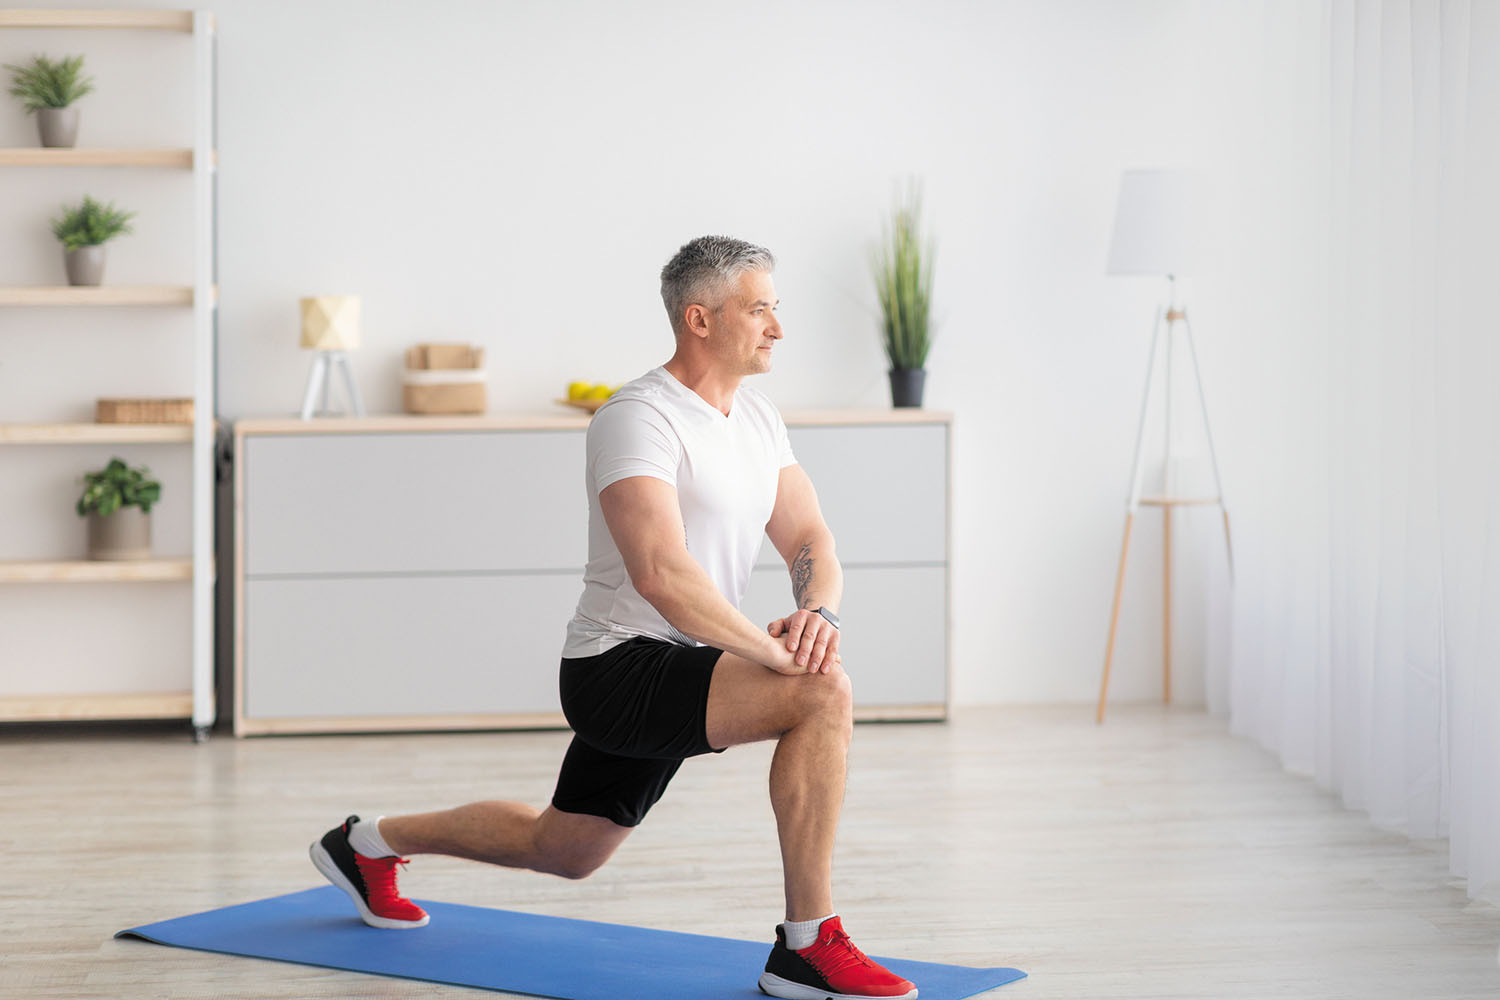 photo of a man doing a lunge exercise on a mat in his home